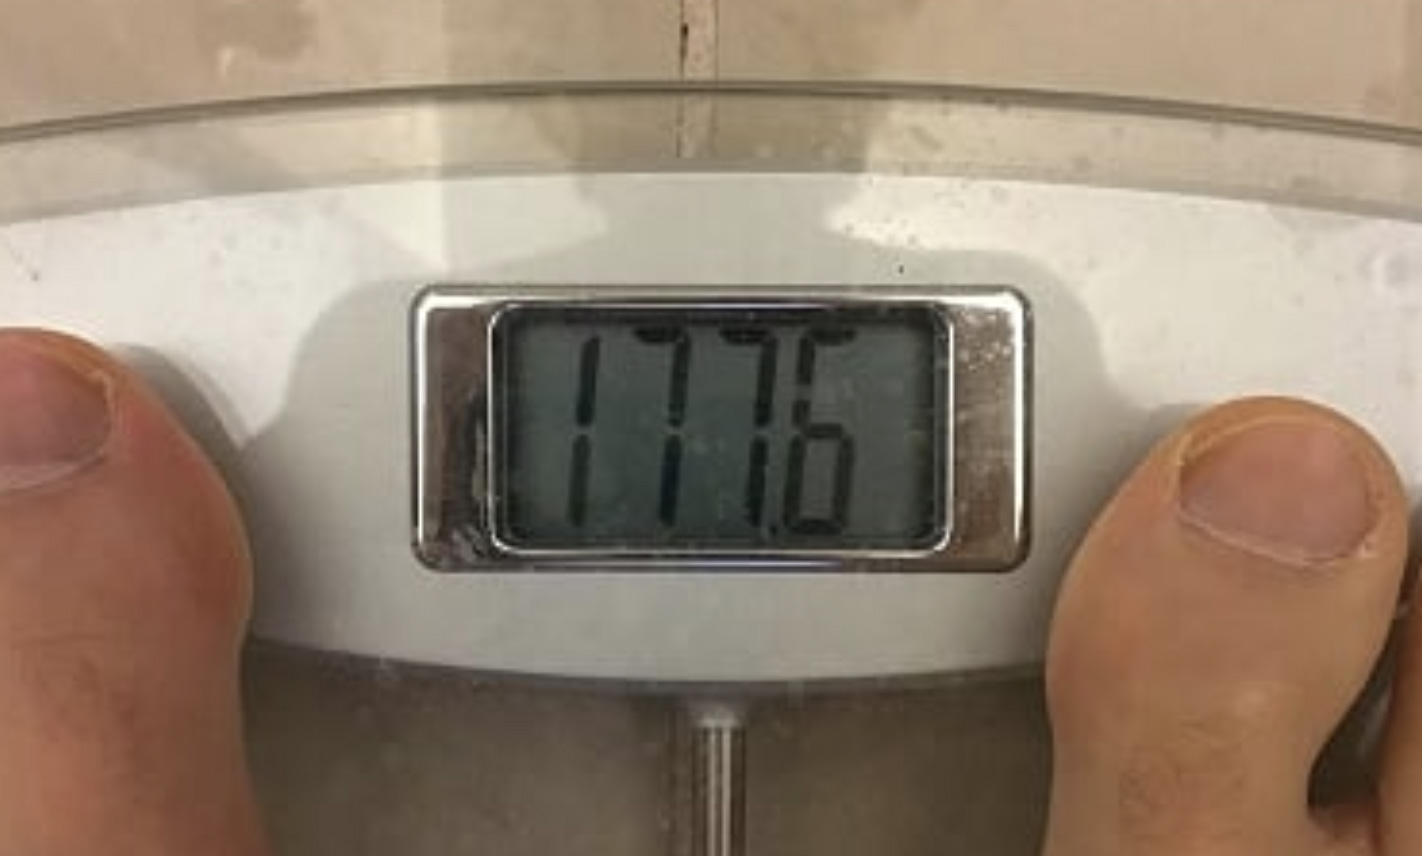 Scale (177.6 lbs)